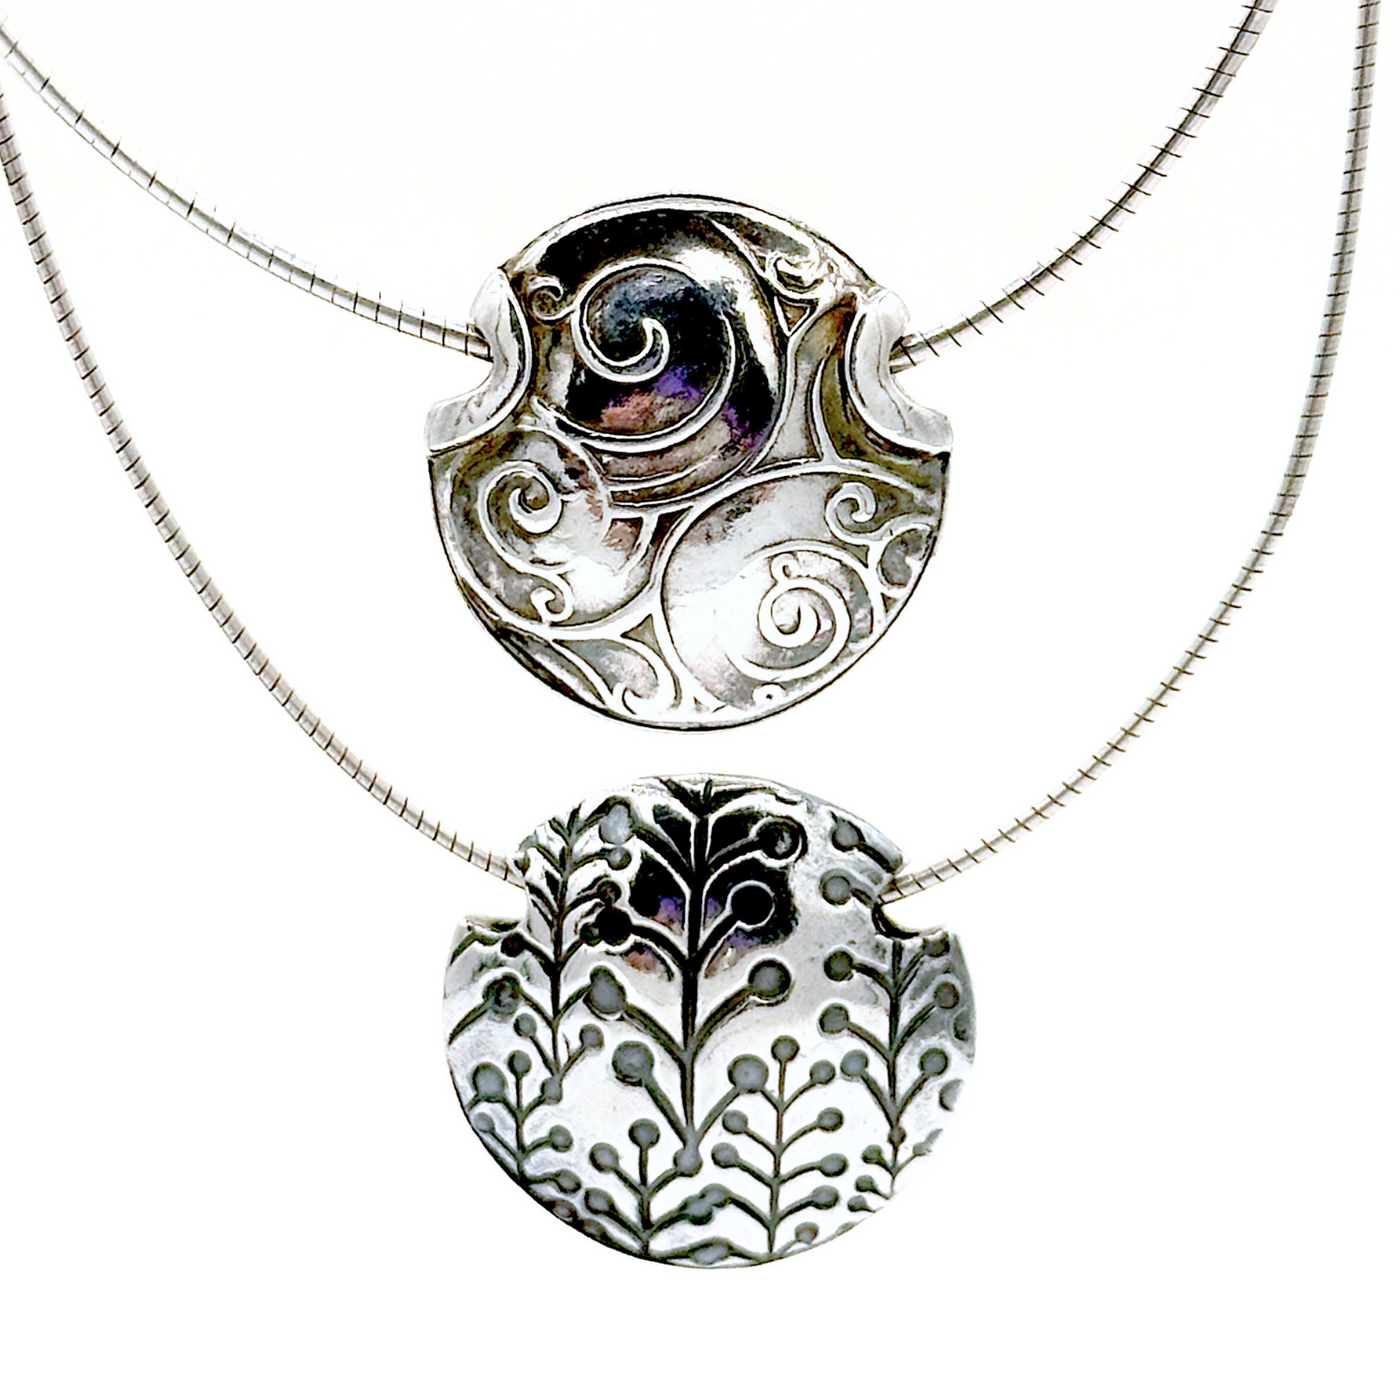 Hollow Metal Clay Pendant with Tammy Honaman May 18, 10am-5pm